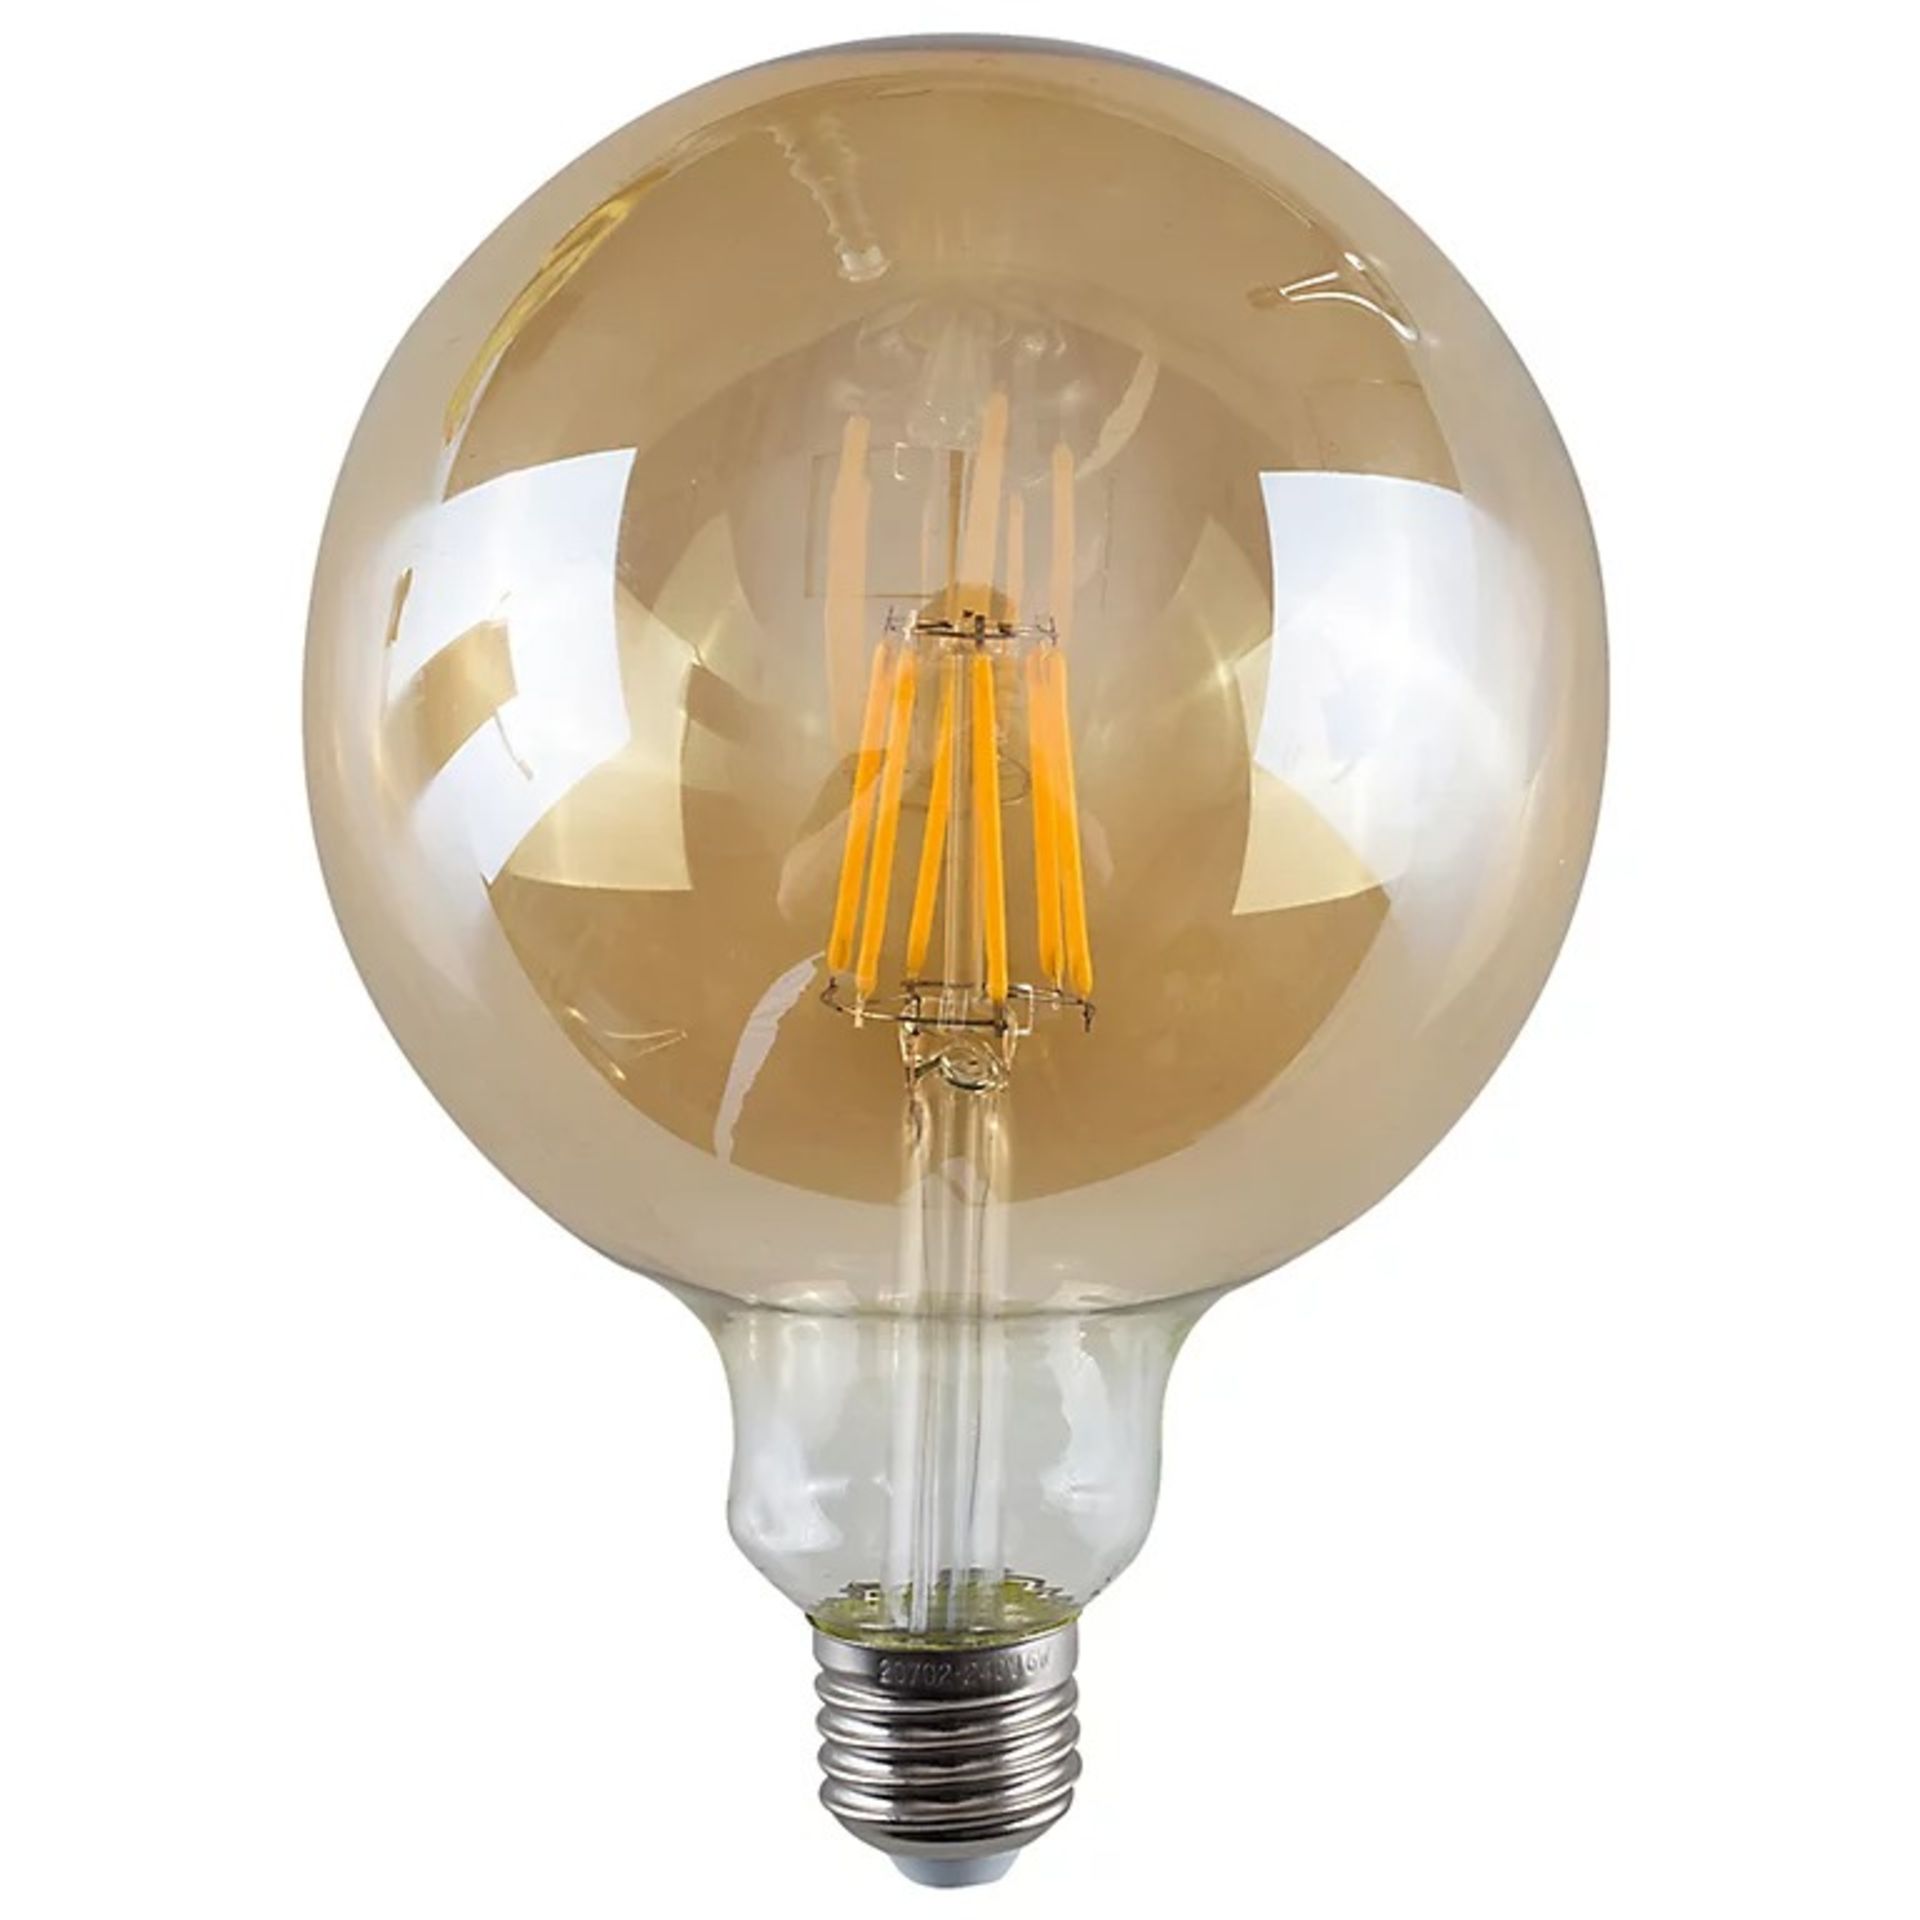 ValueLights Pack of 2 Retro Style 6w LED Filament ES E27 Giant Globe Amber Tinted Light Bulbs -